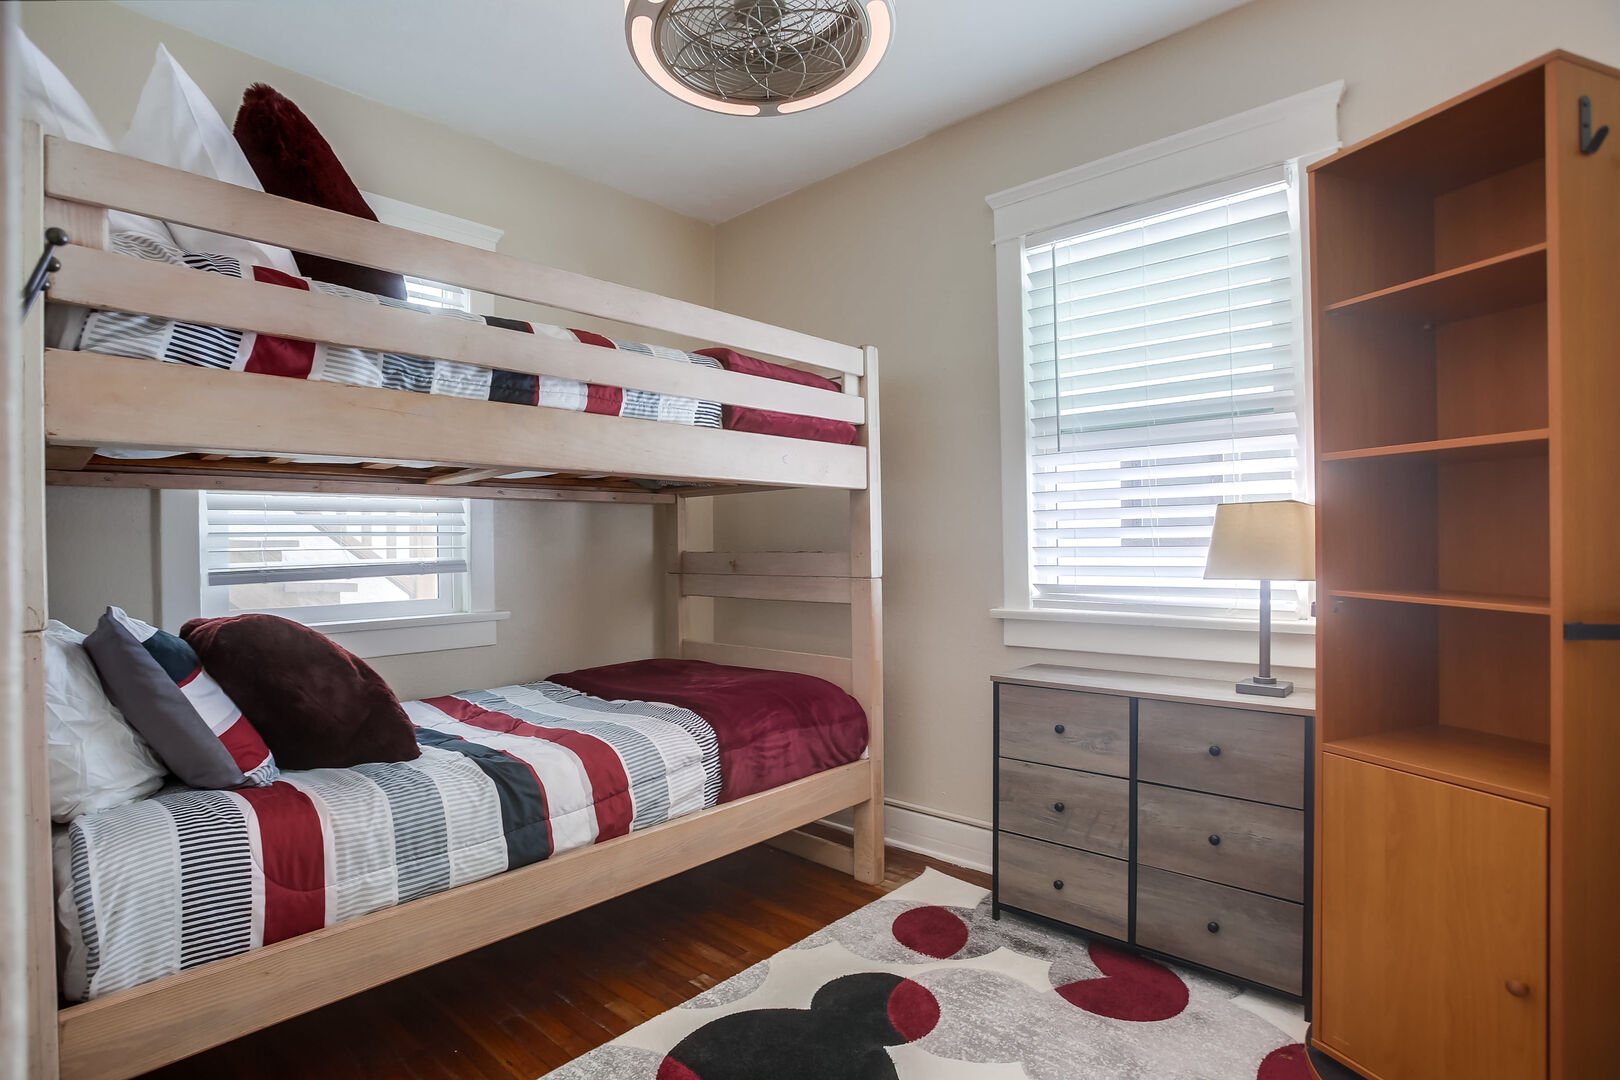 Guest bedroom with twin bunk beds, ceiling fan, dresser and small closet